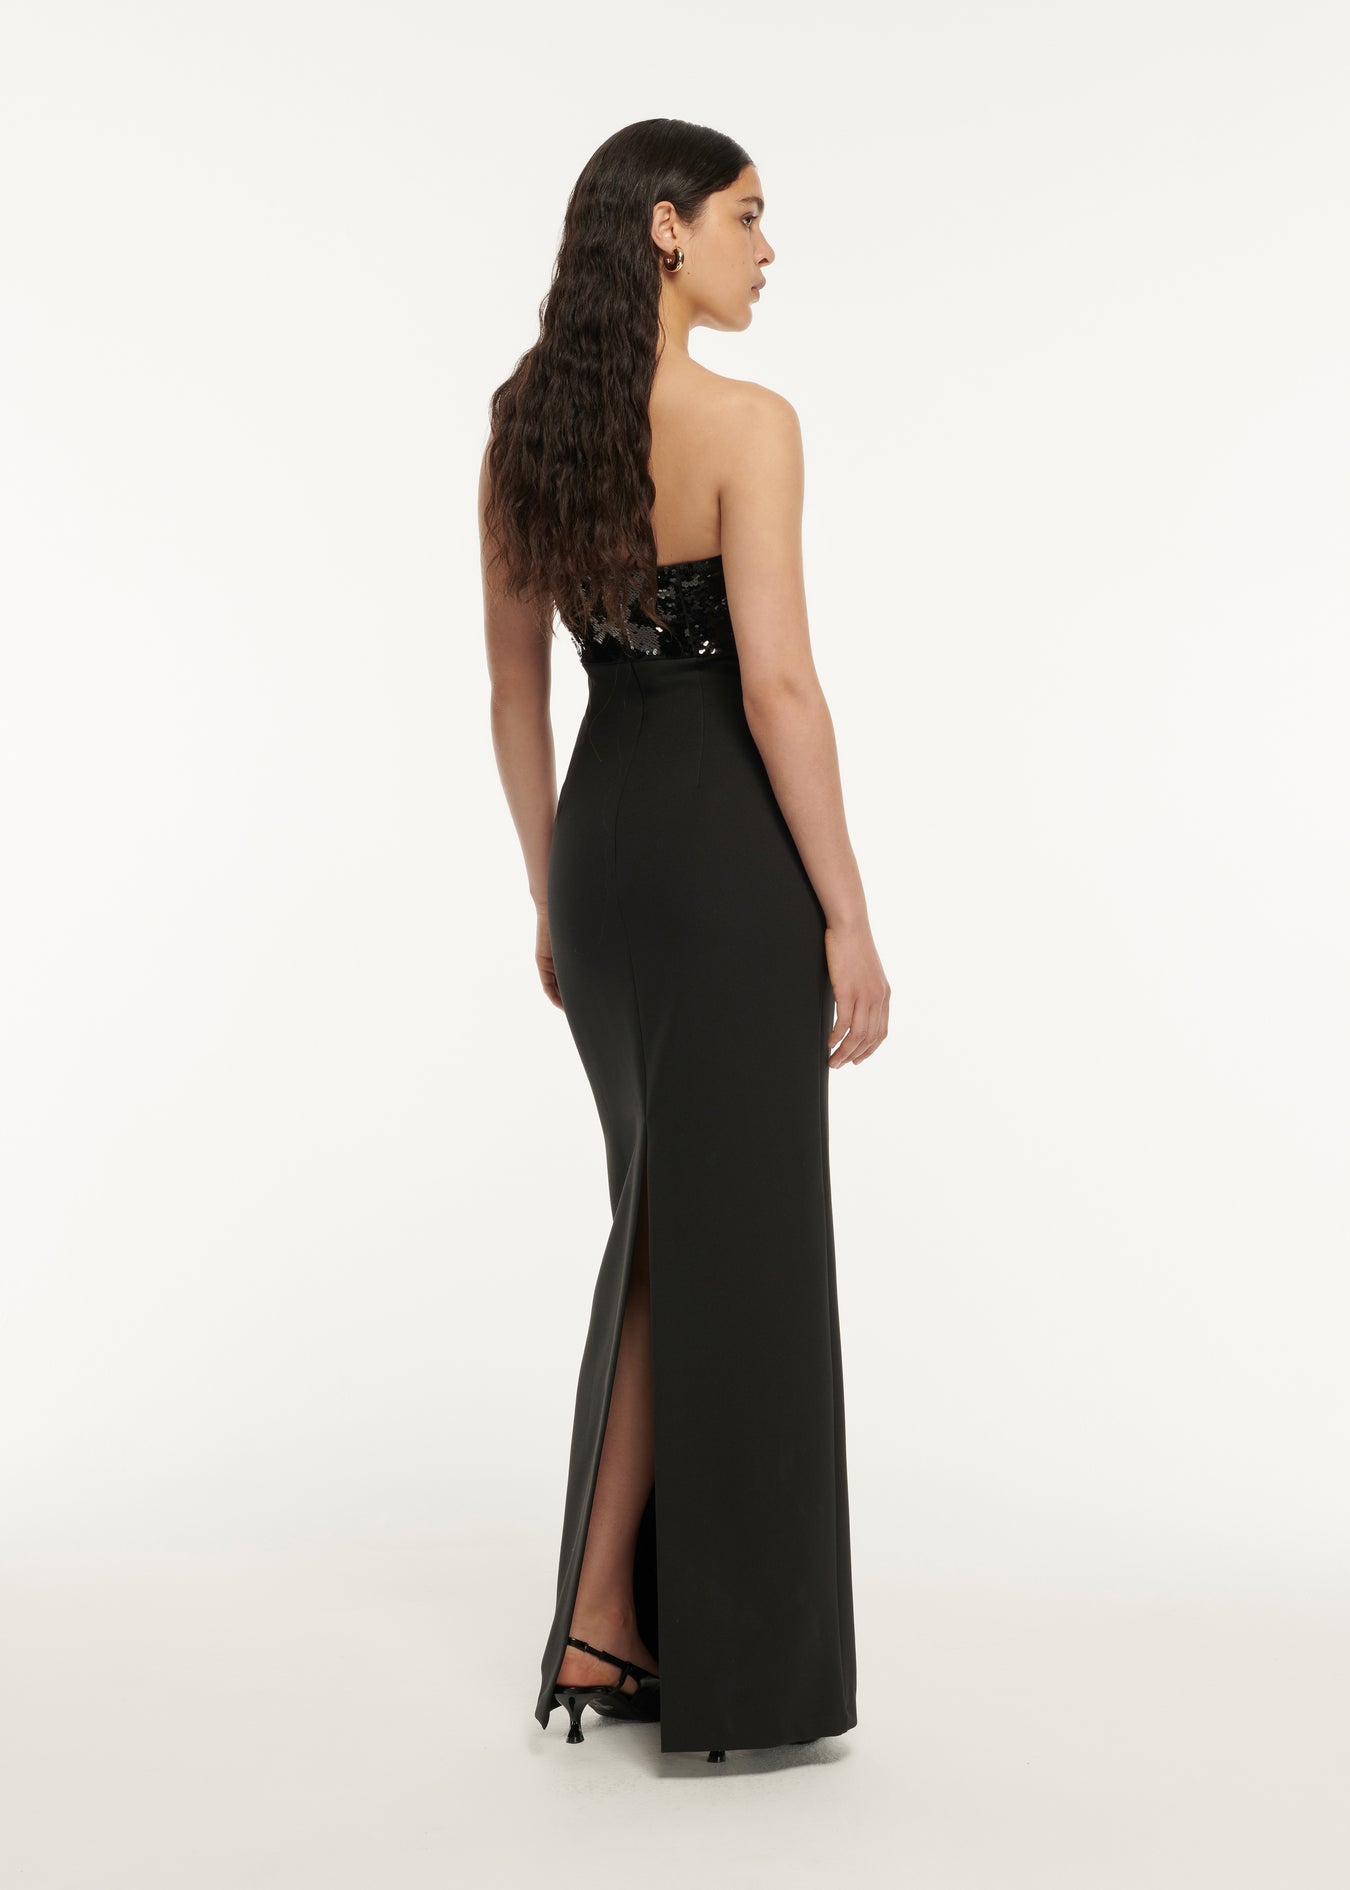 The back of a woman wearing the Strapless Embellished Maxi Dress